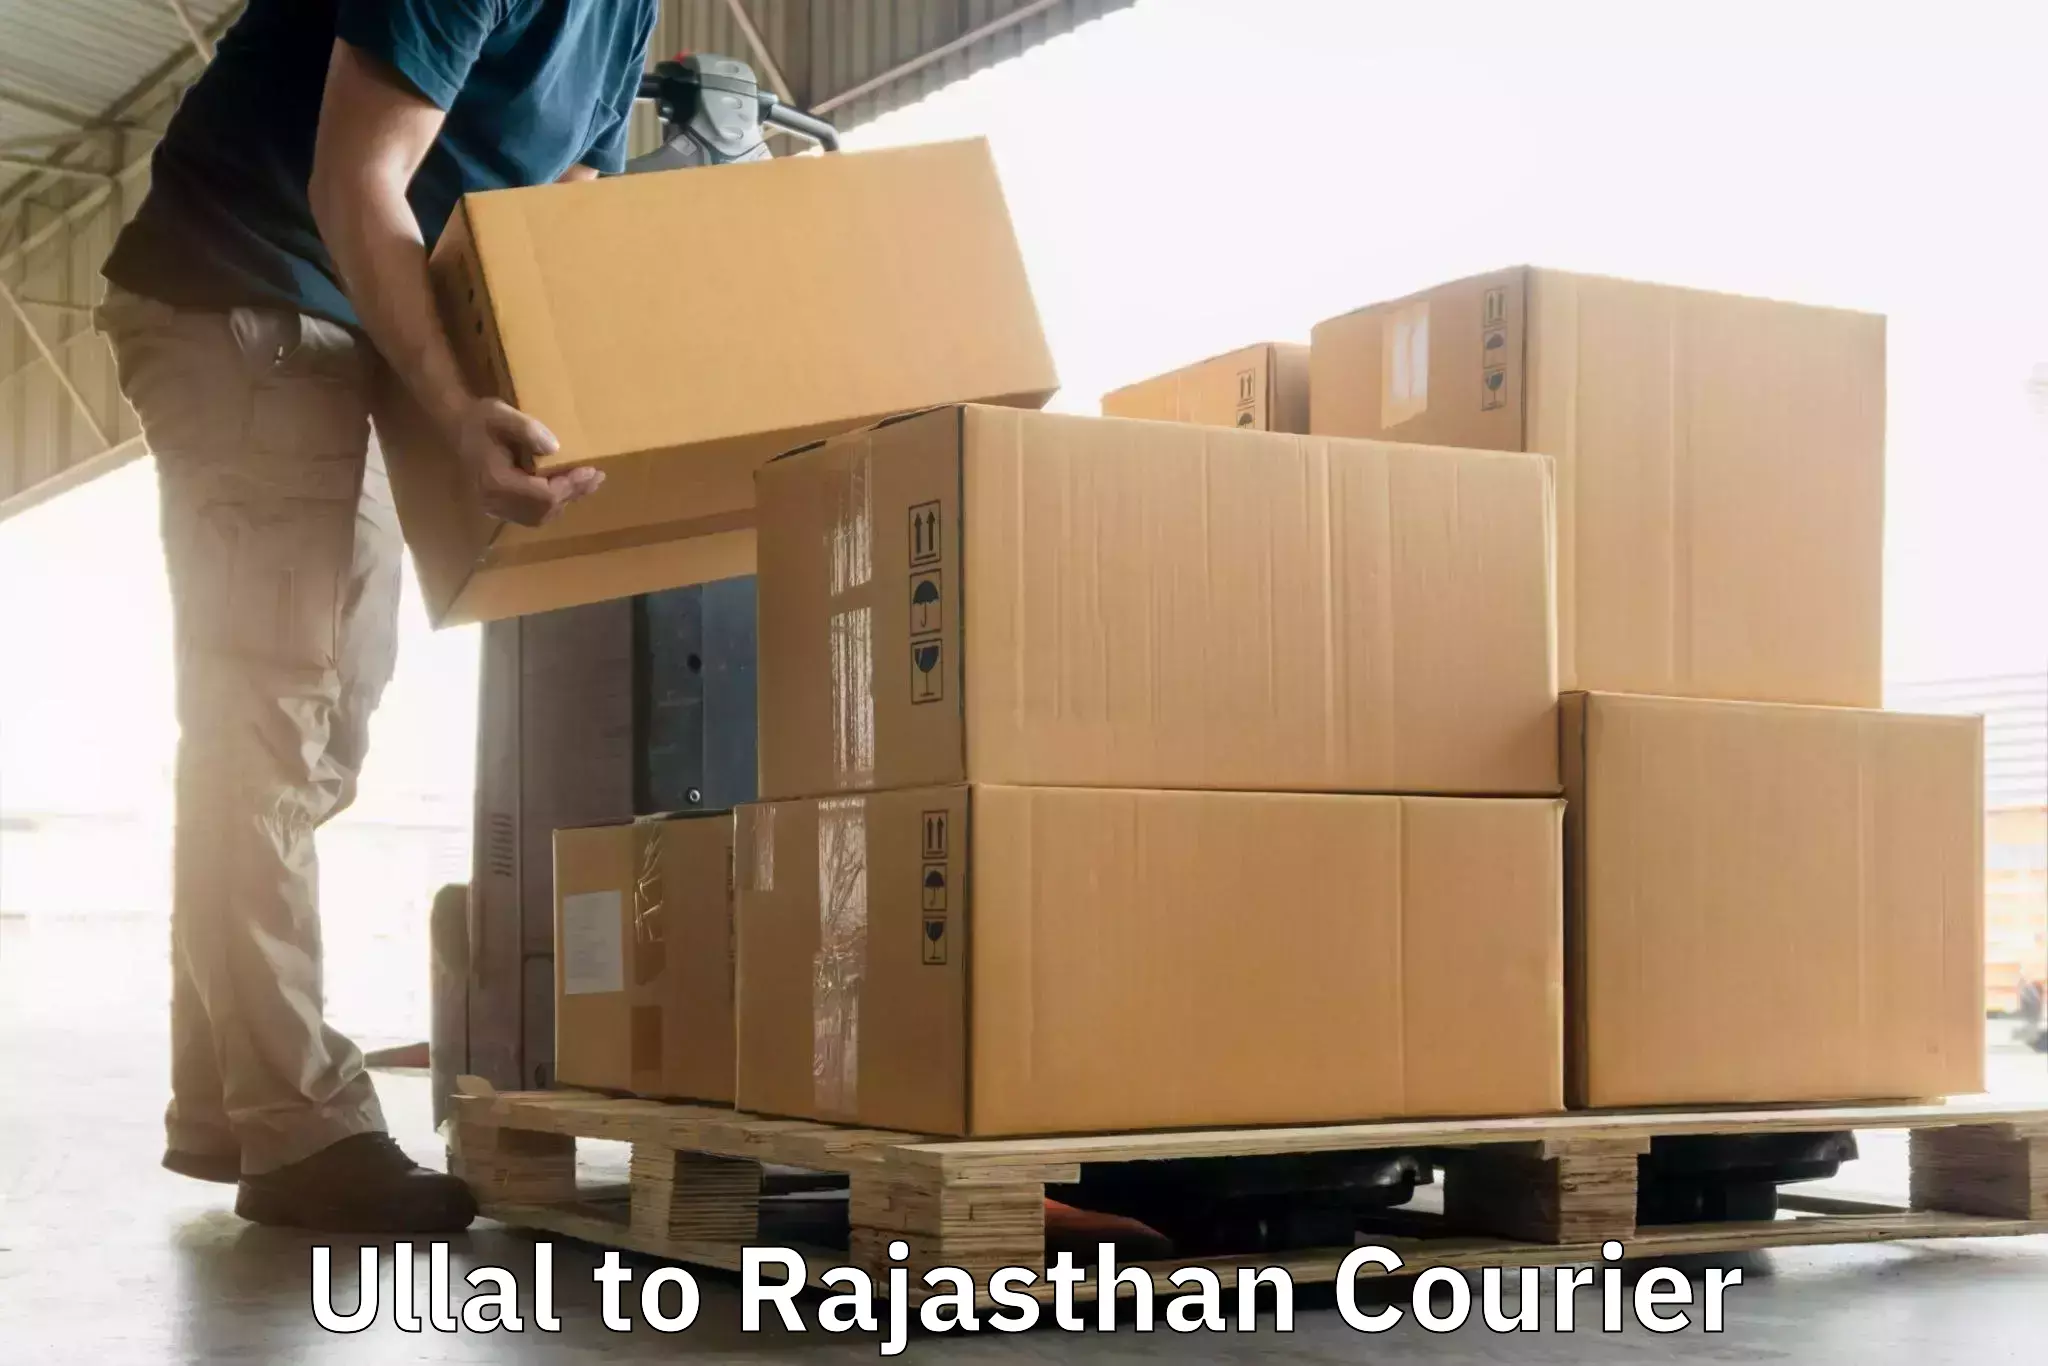 Seamless shipping experience Ullal to Yeswanthapur